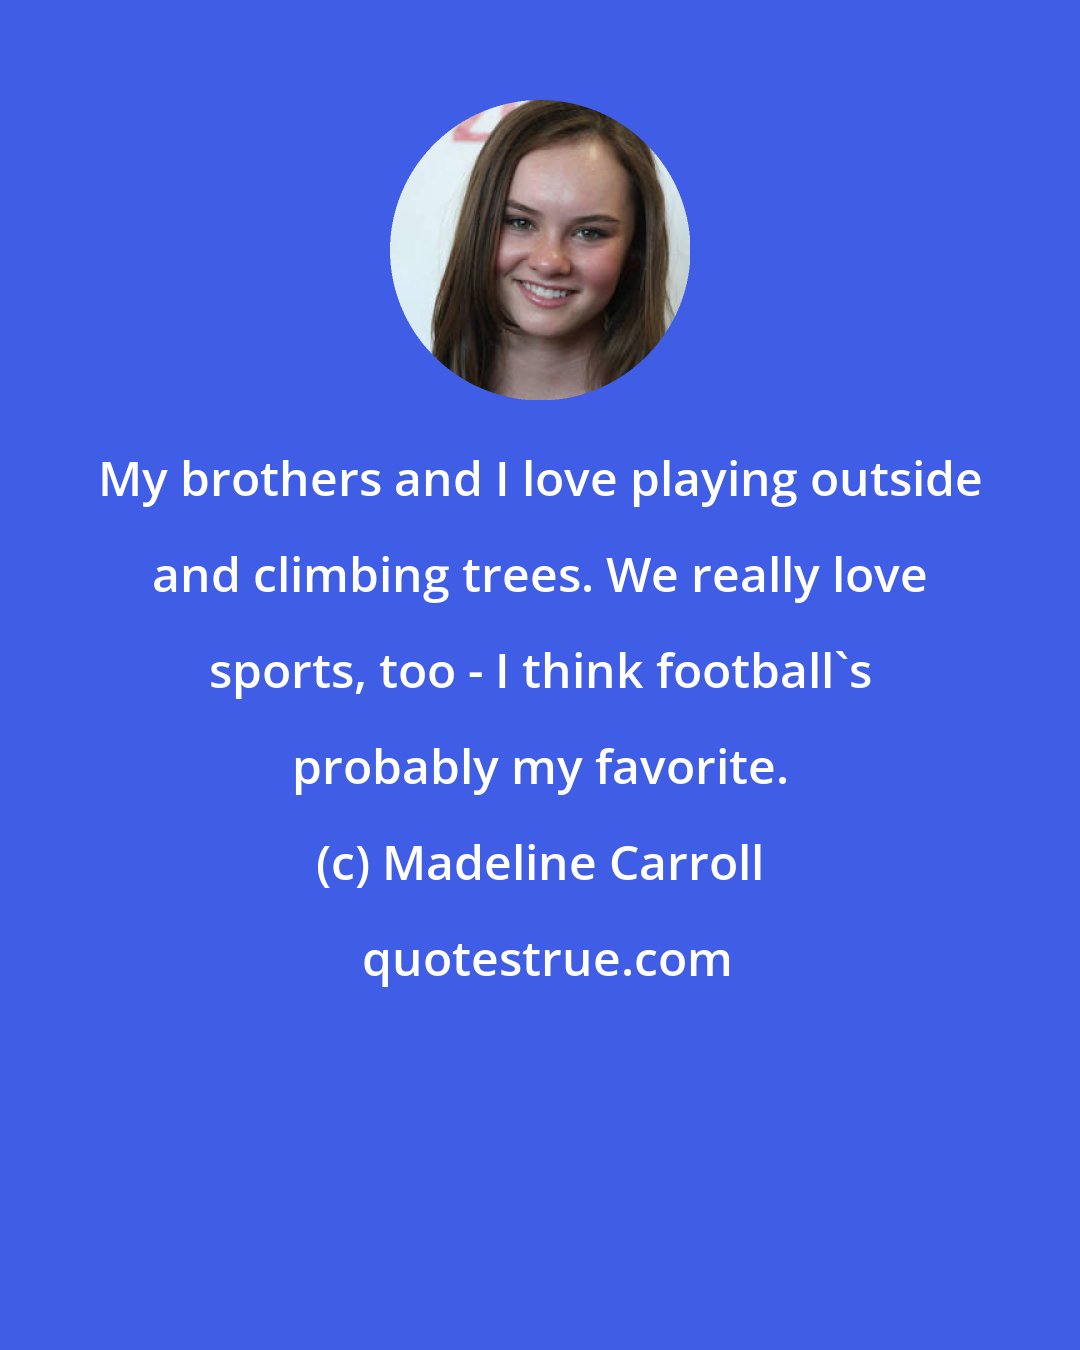 Madeline Carroll: My brothers and I love playing outside and climbing trees. We really love sports, too - I think football's probably my favorite.